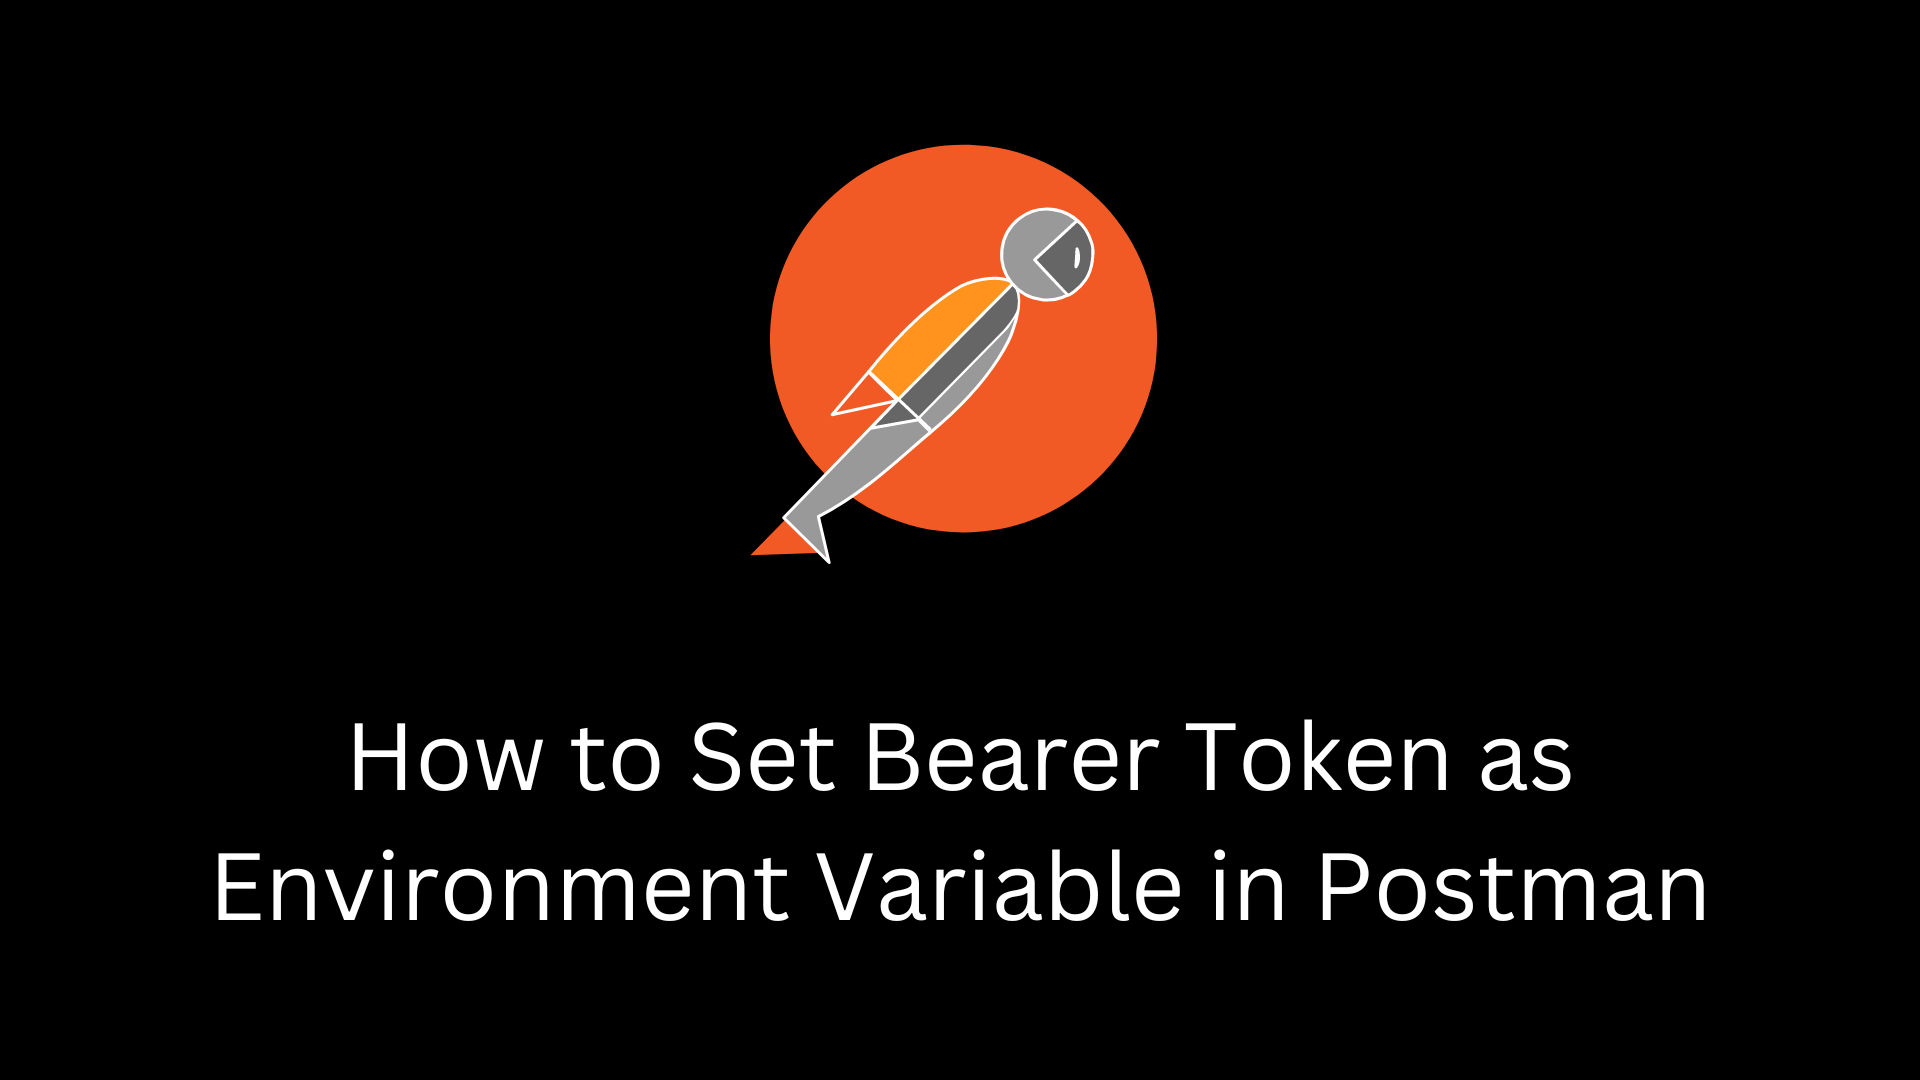 How to Set Bearer Token as Environment Variable in Postman